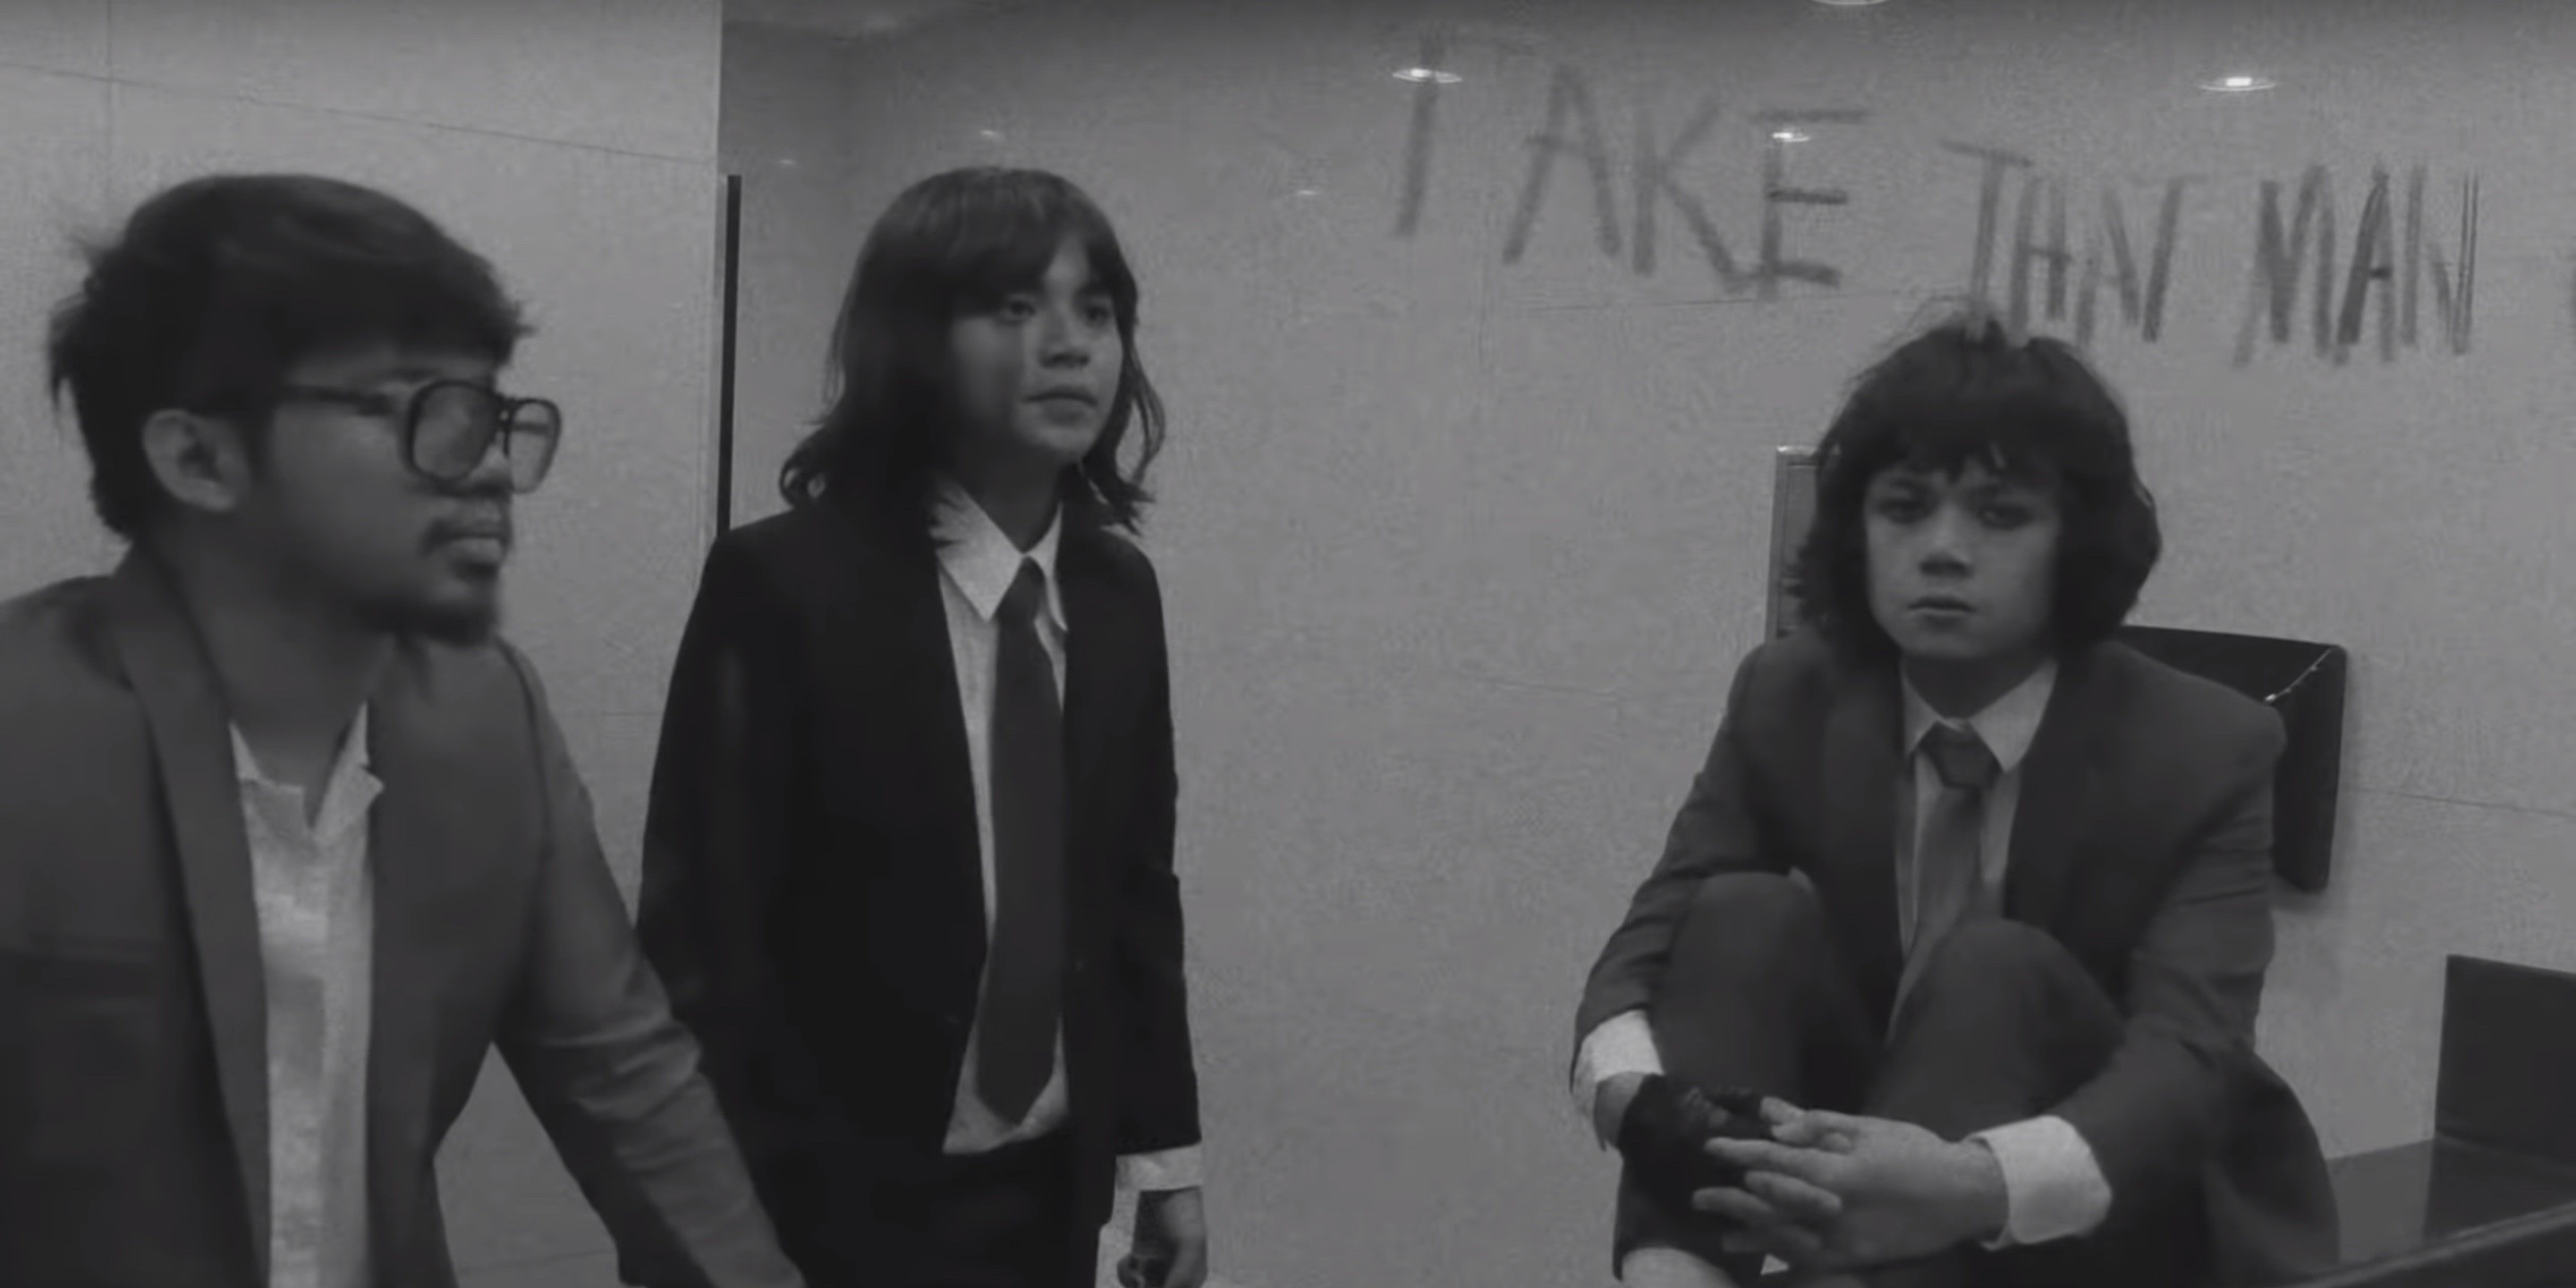 IV of Spades end 2018 with new music video, 'Take That Man' – watch